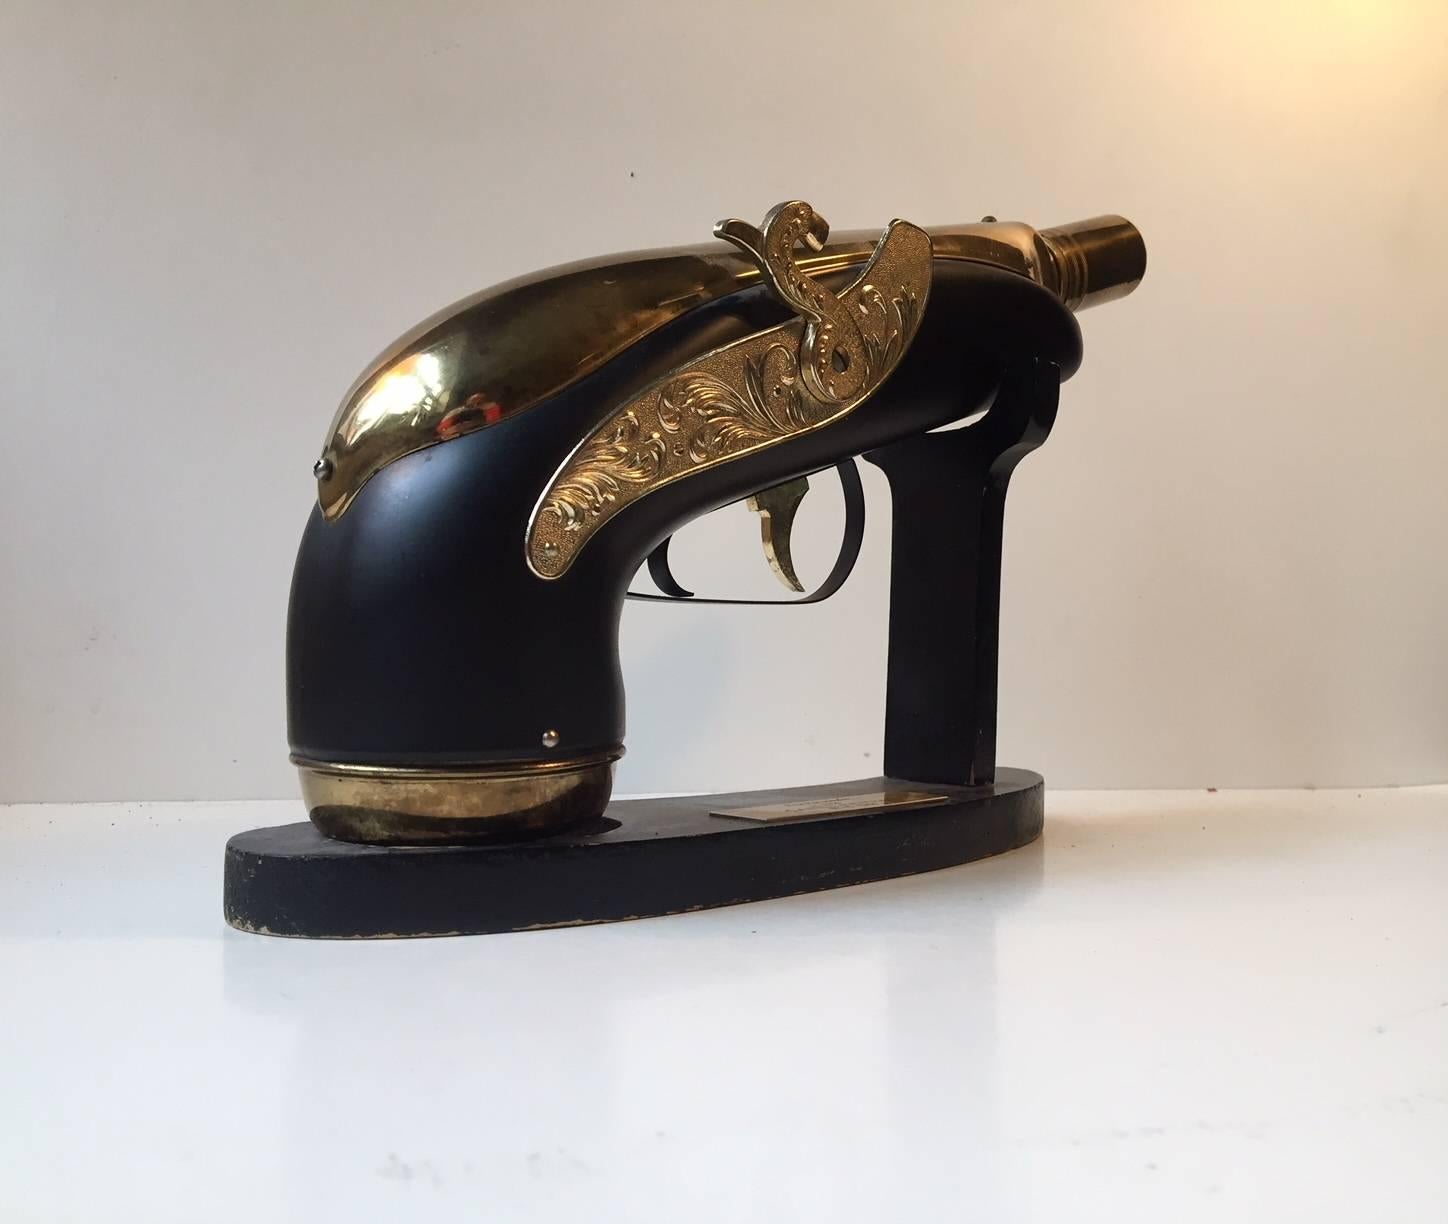 This novelty piece was given as a gift in 1964 to the manager of a Danish company called Carl Leervad by the employees. Its a vintage Blunderbuss Musical Gun decanter. When you take the gun decanter off its stand, it plays 